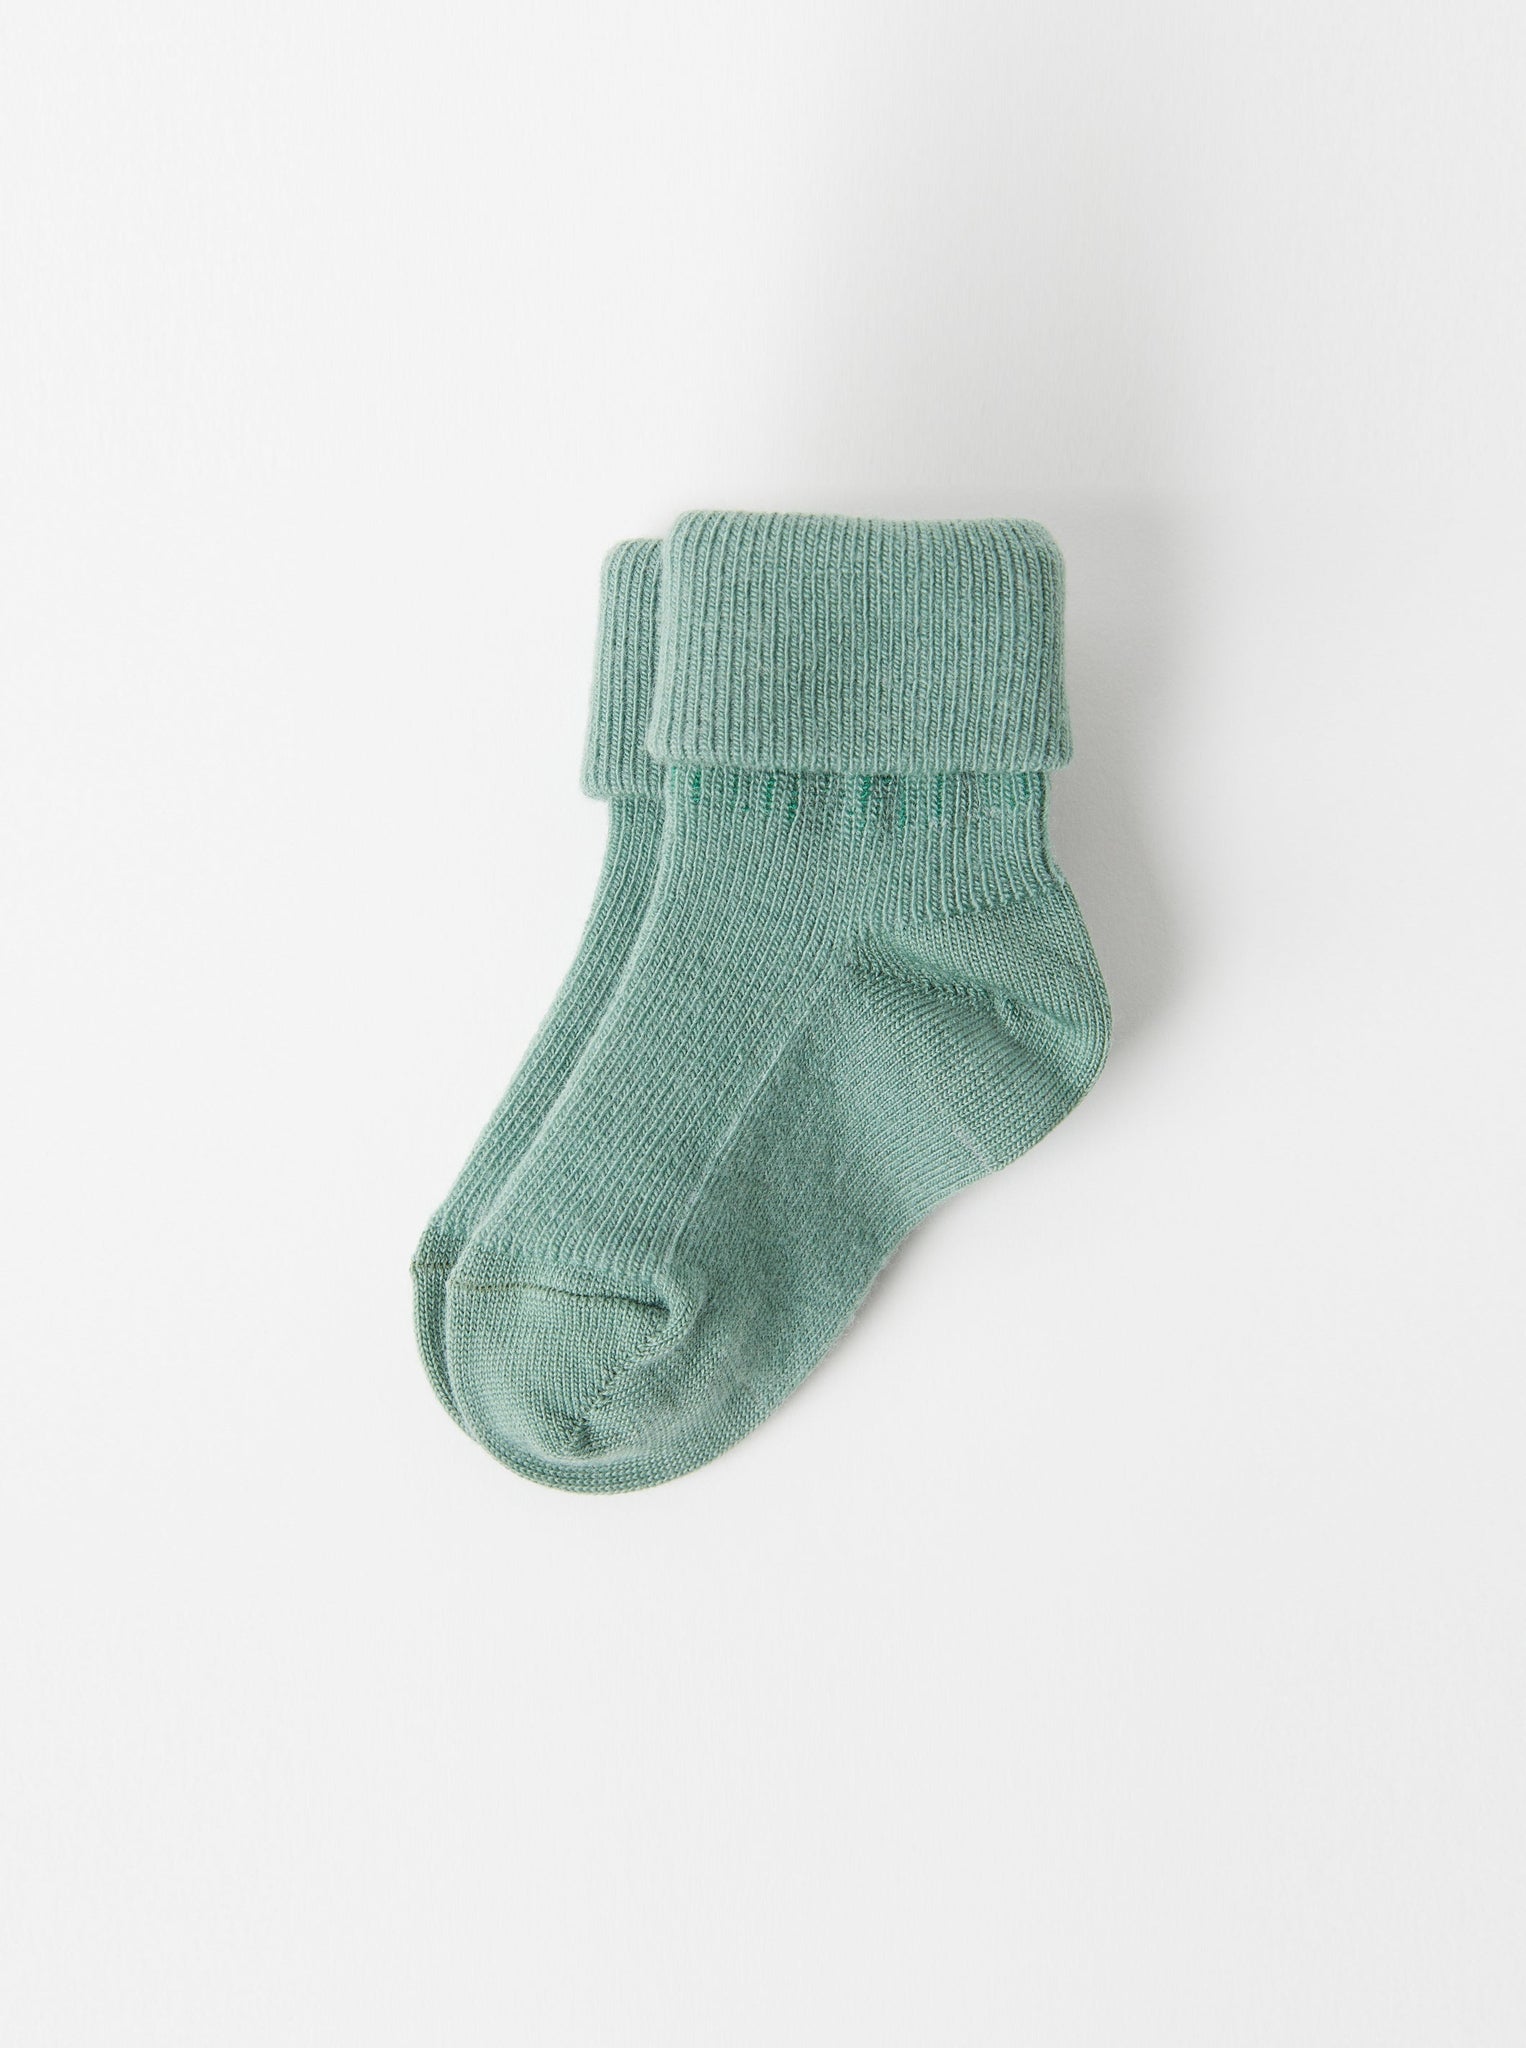 Green Merino Wool Baby Socks from the Polarn O. Pyret kidswear collection. Ethically produced kids outerwear.